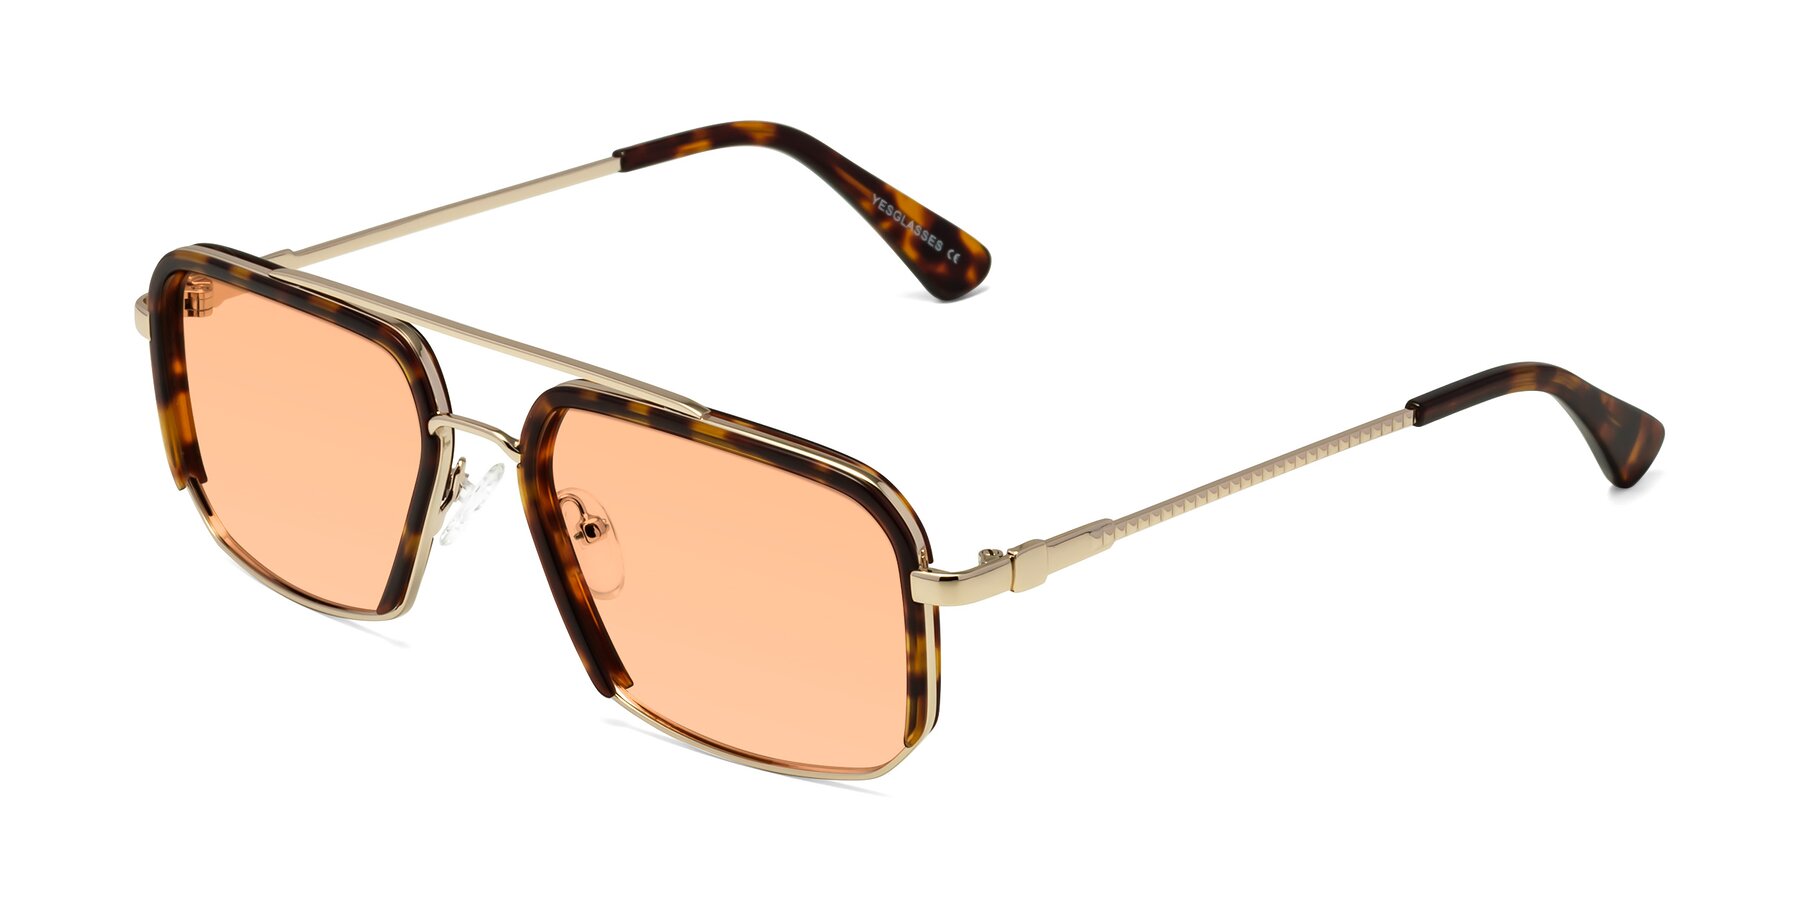 Angle of Dechter in Tortoise-Gold with Light Orange Tinted Lenses